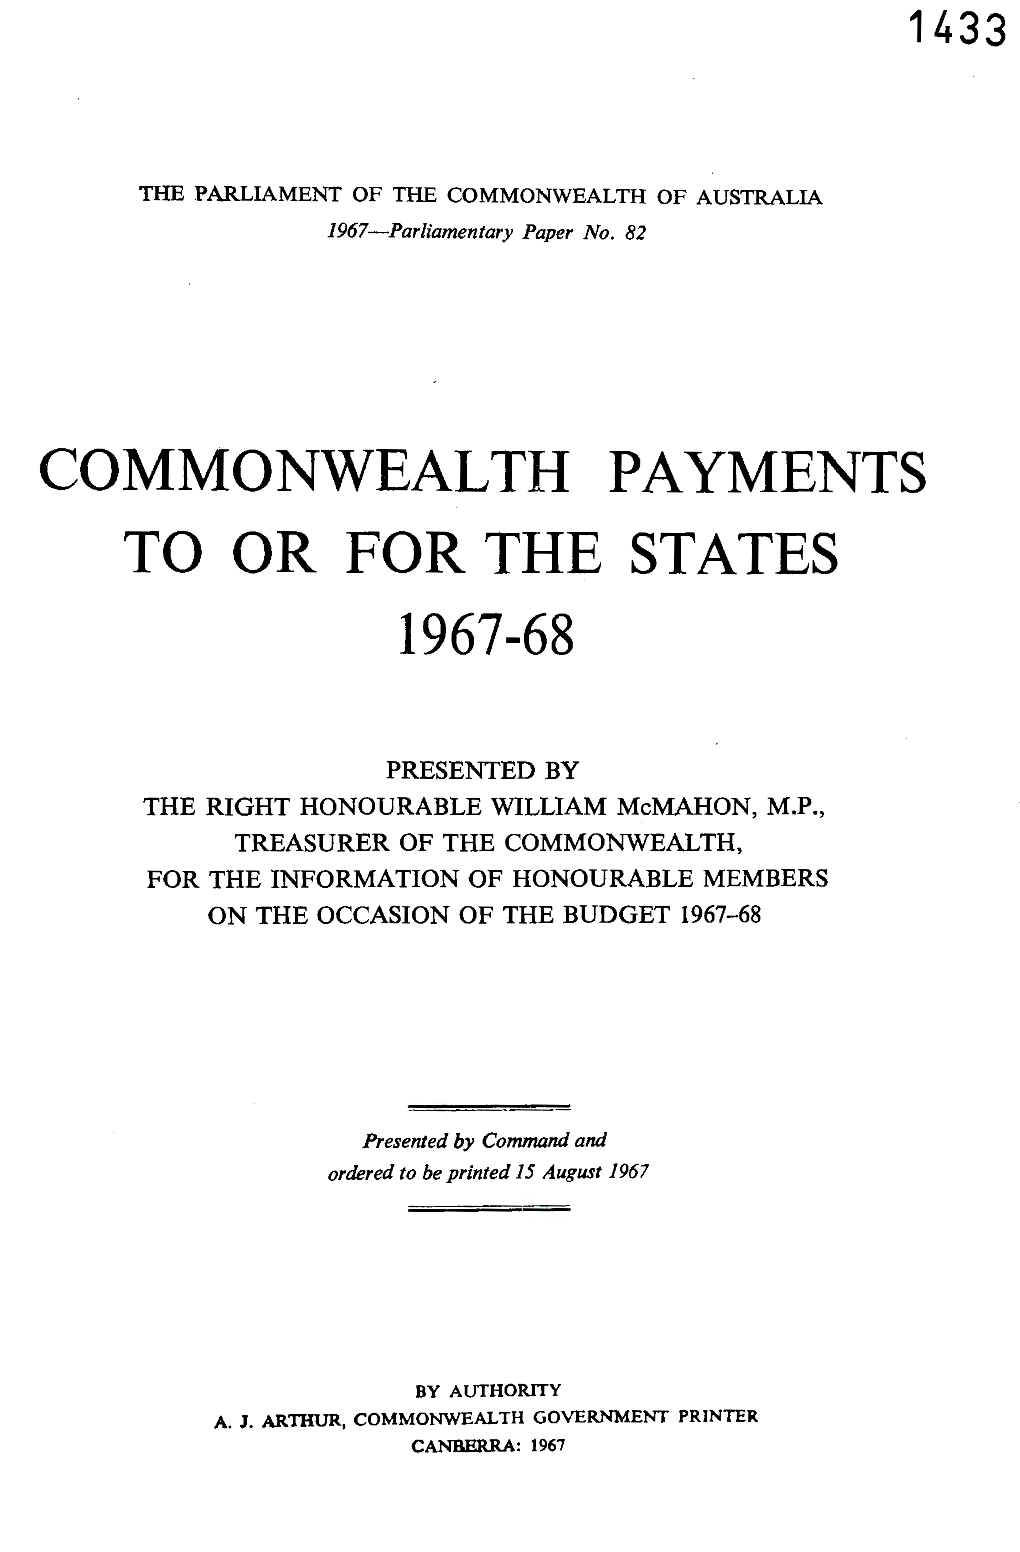 Commonwealth Payment to Or for the States